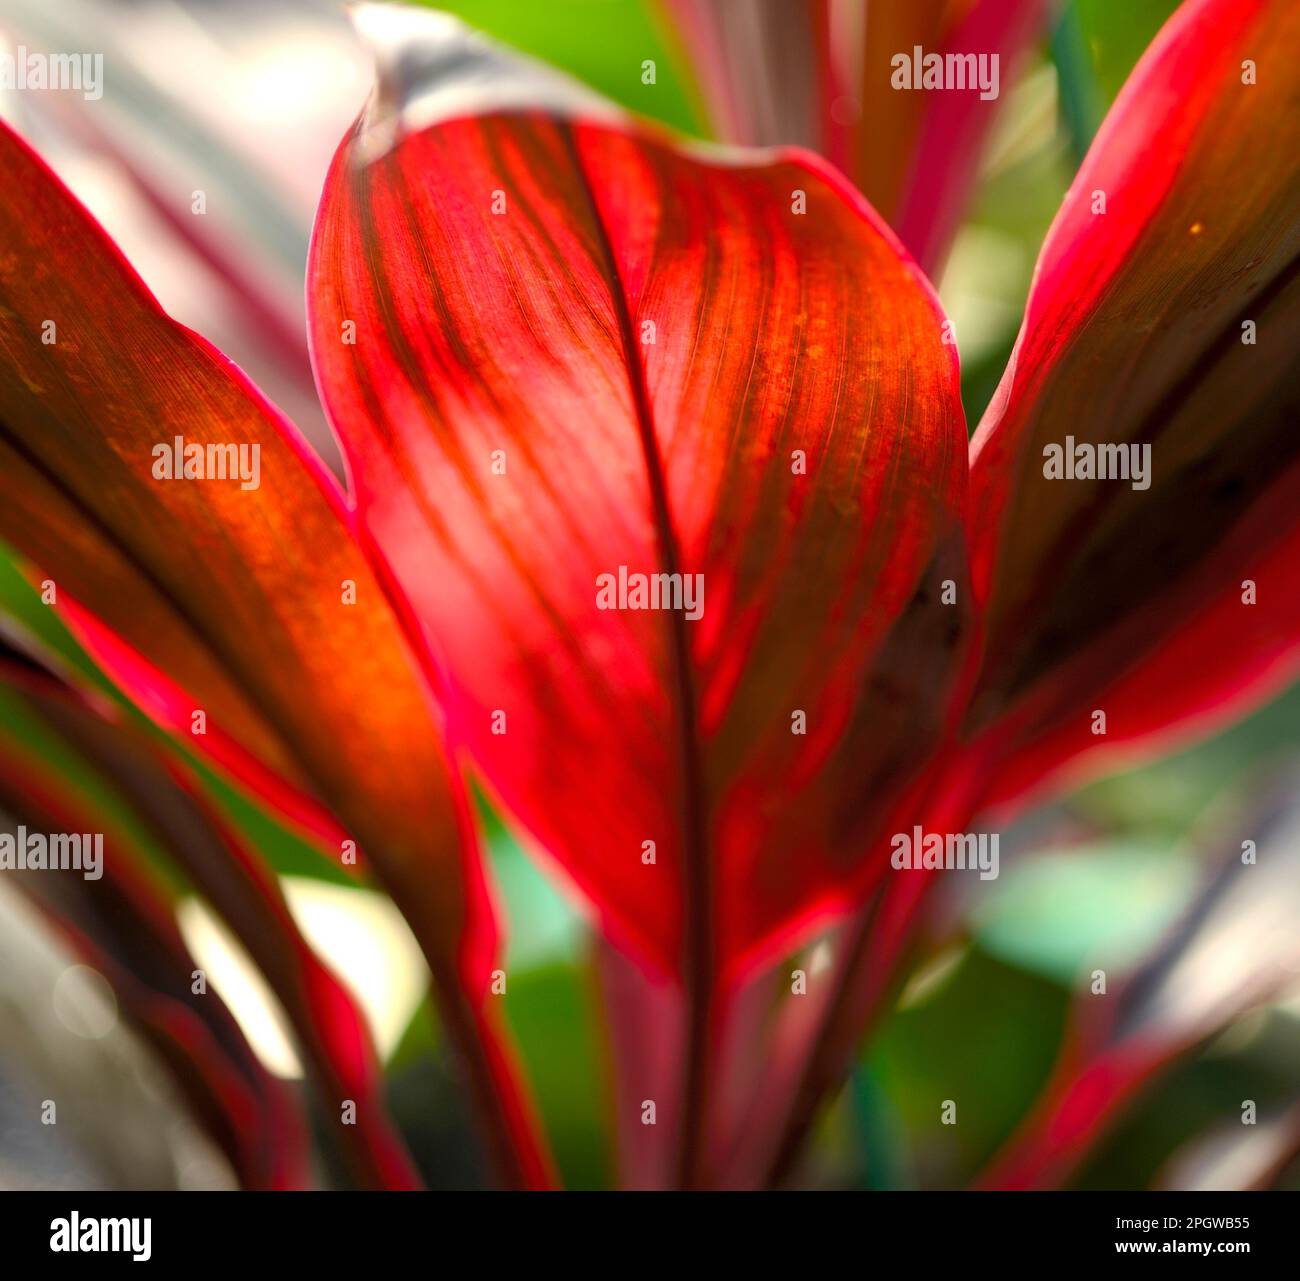 Image of backlit red leaves of a Ti plant (Cordyline fruticosa) Stock Photo